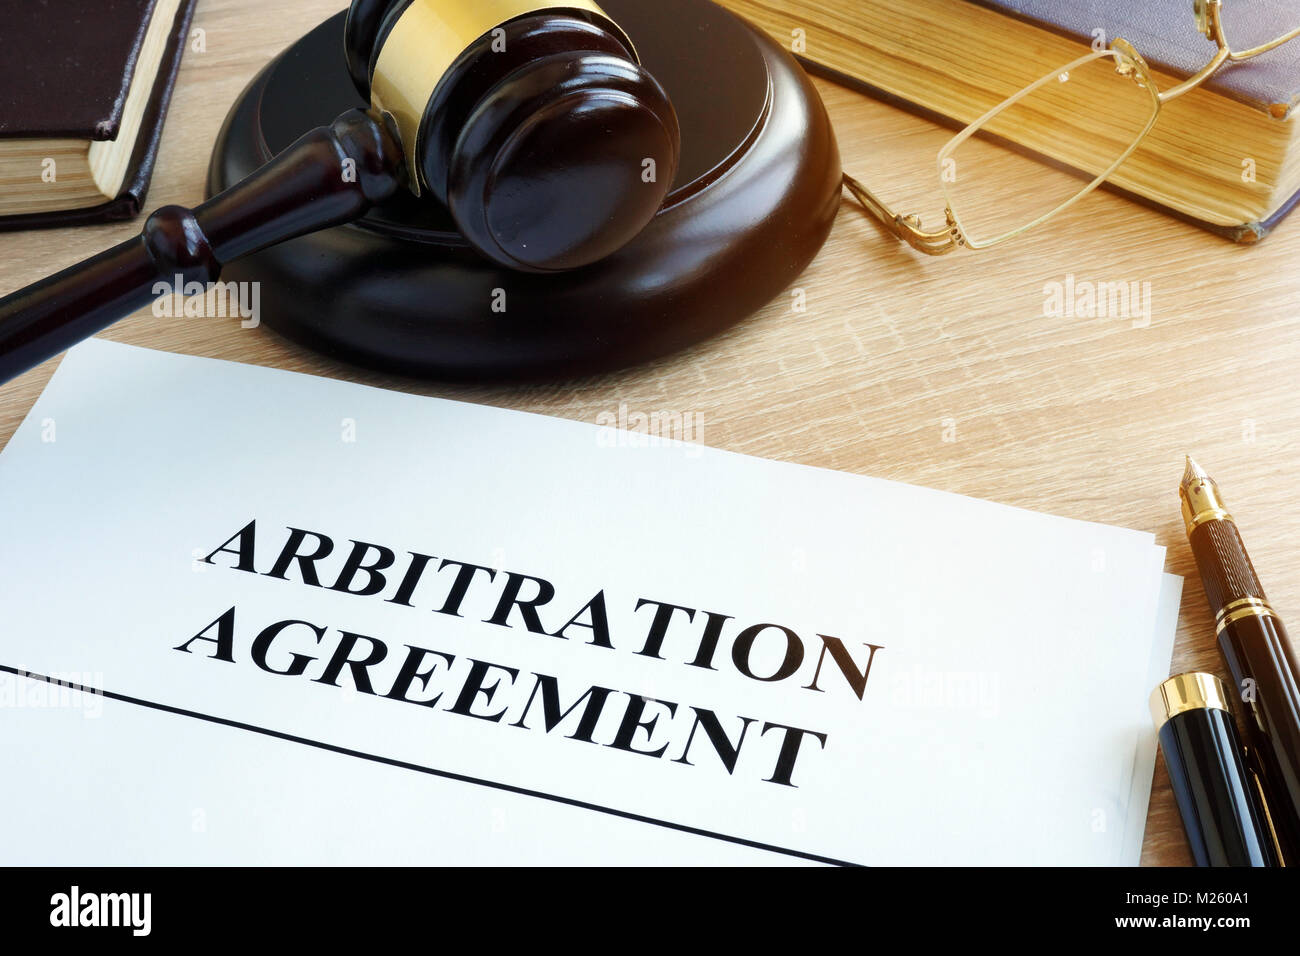 Arbitration agreement resolution of commercial disputes on a desk. Stock Photo